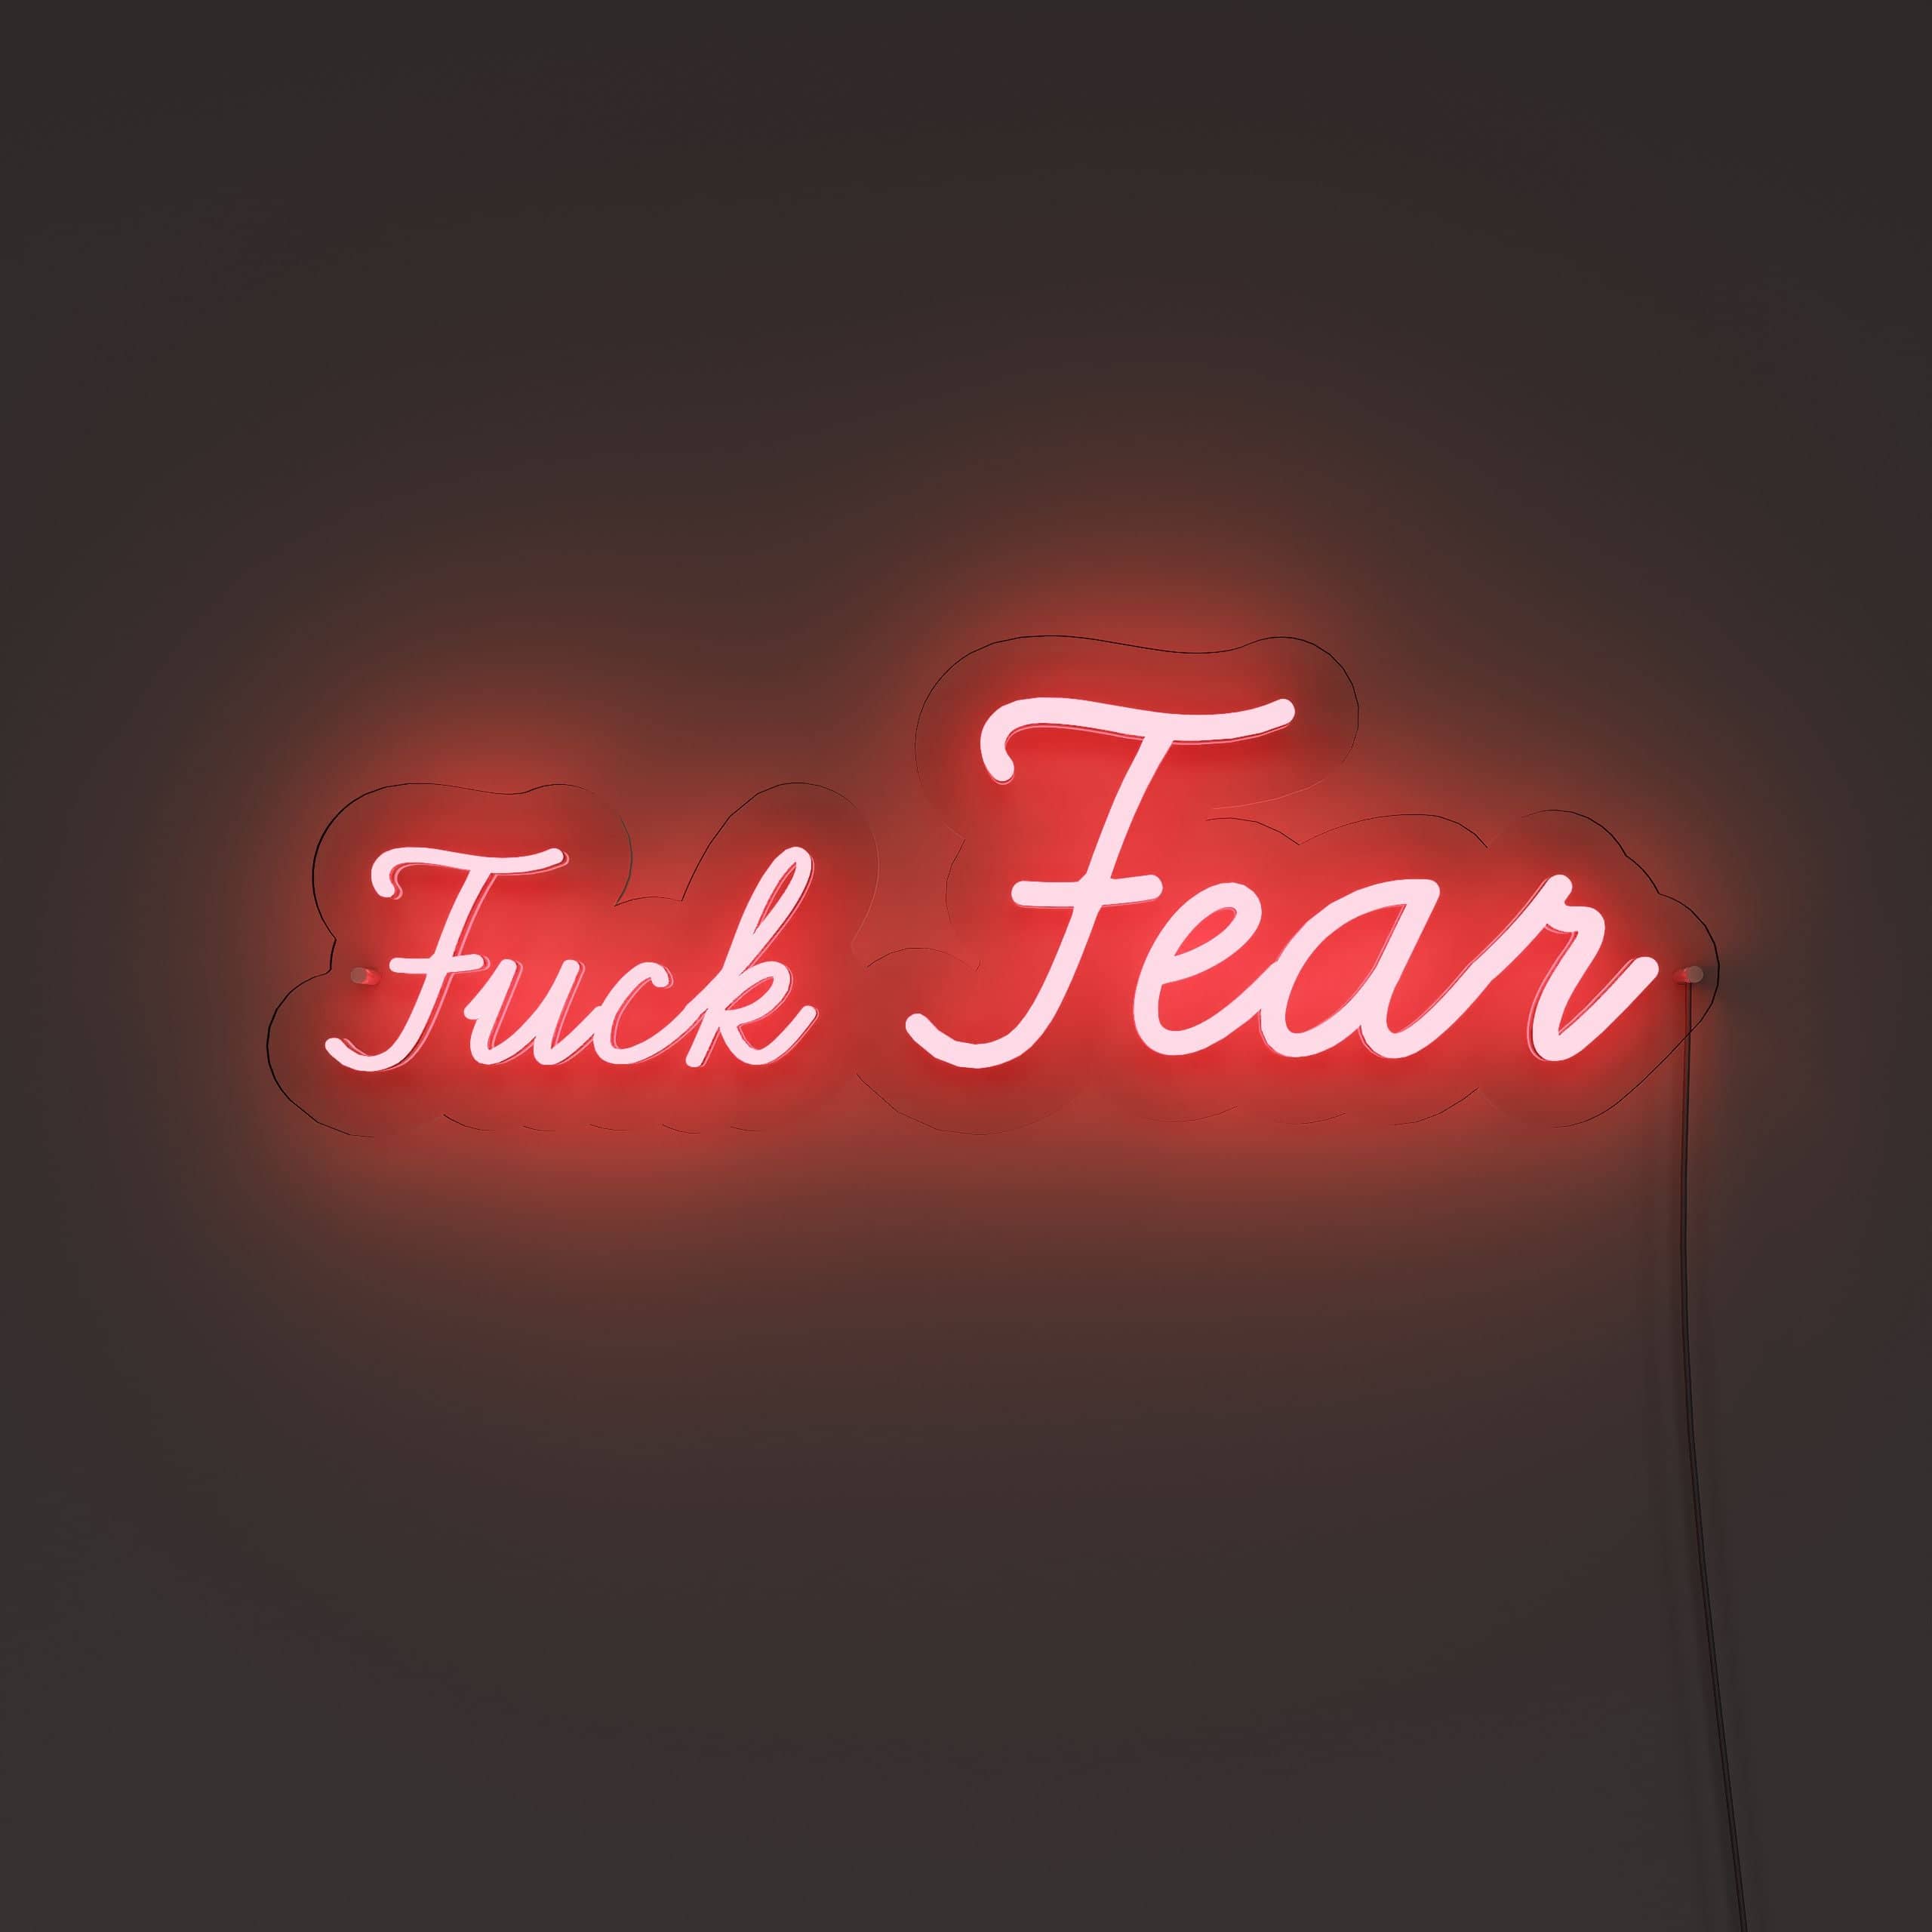 empower-yourself,-banish-fear-neon-sign-lite